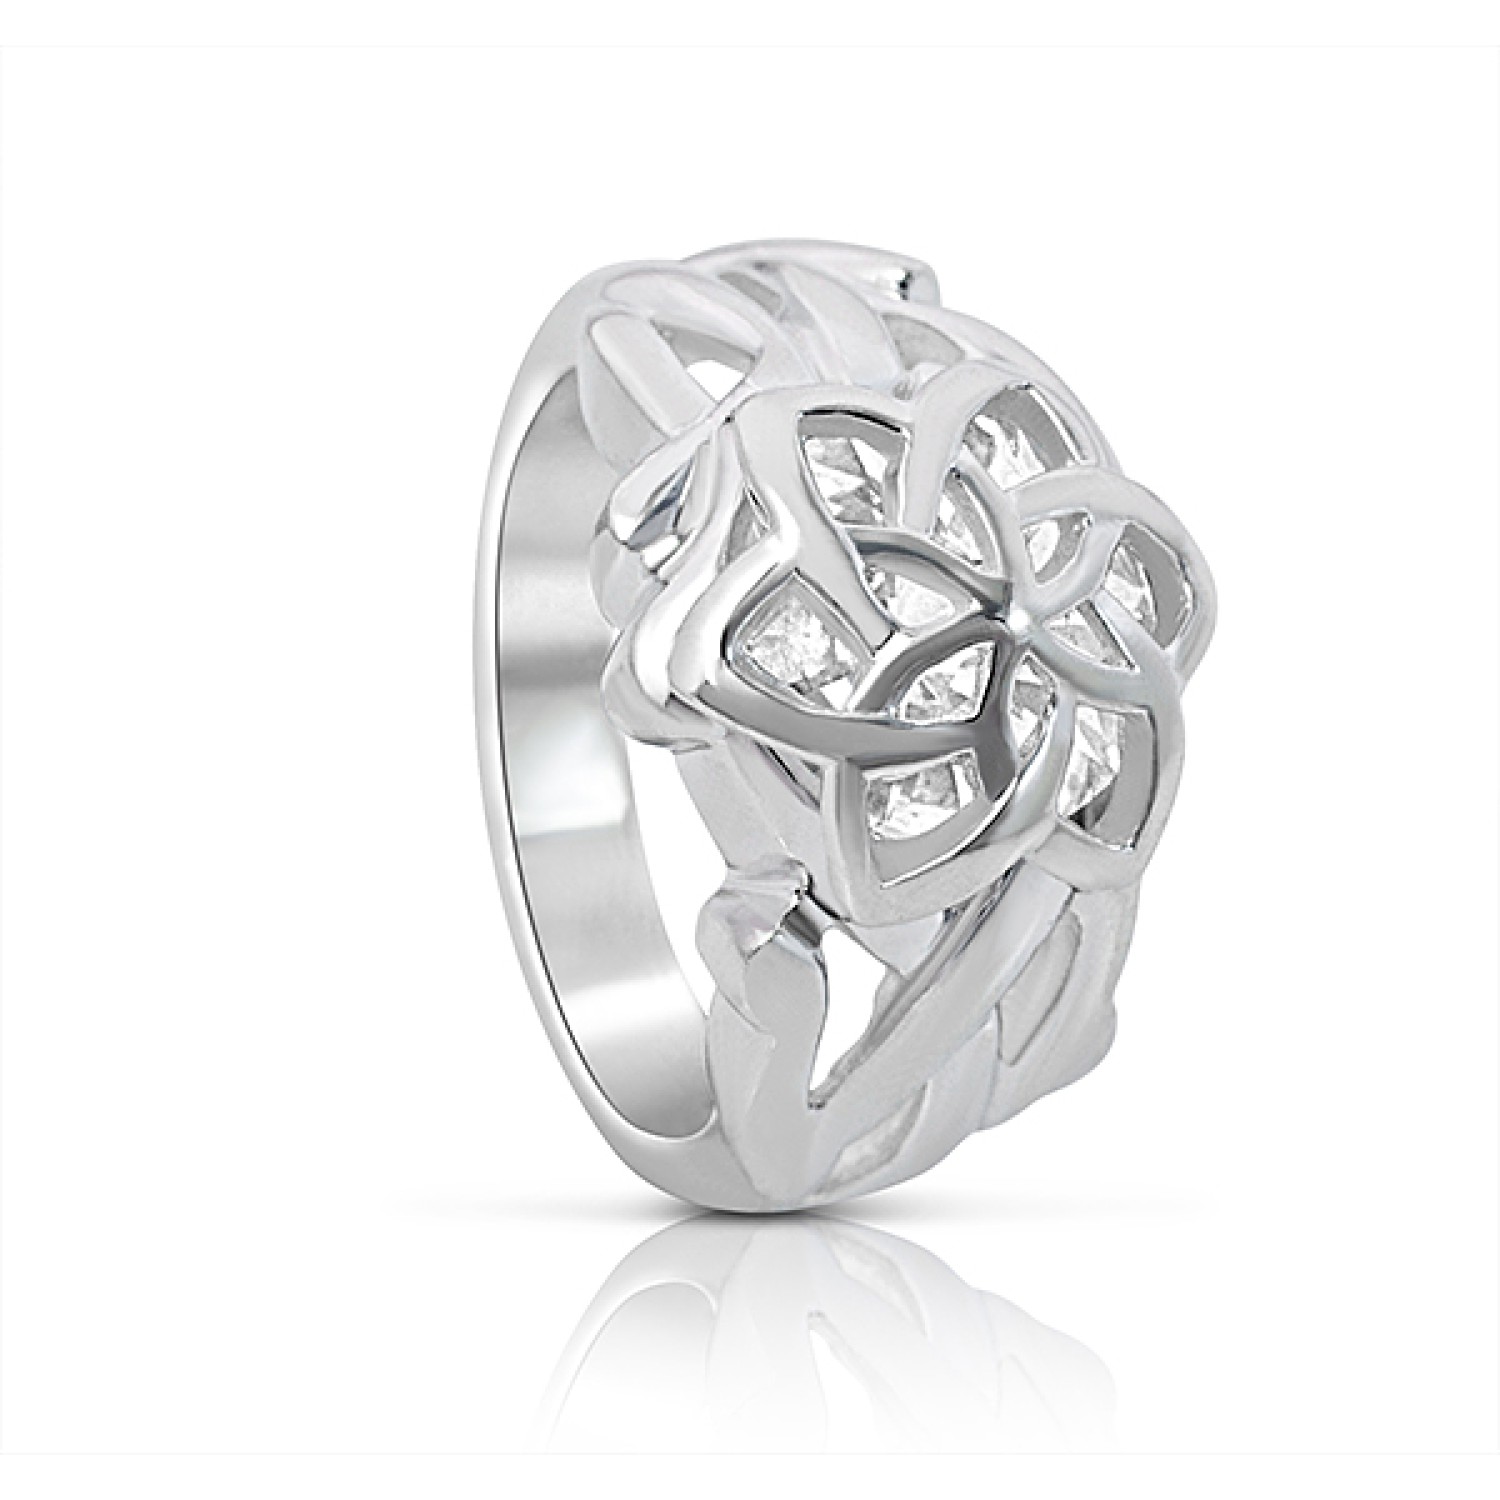 Shop the official Galadriel's Nenya Silver Ring of Adamant from Lord of the Rings. This stunning piece of jewelry is crafted from genuine sterling silver and features a sparkling cubic zirconia stone. Wear it as a symbol of your love for the fantasy world